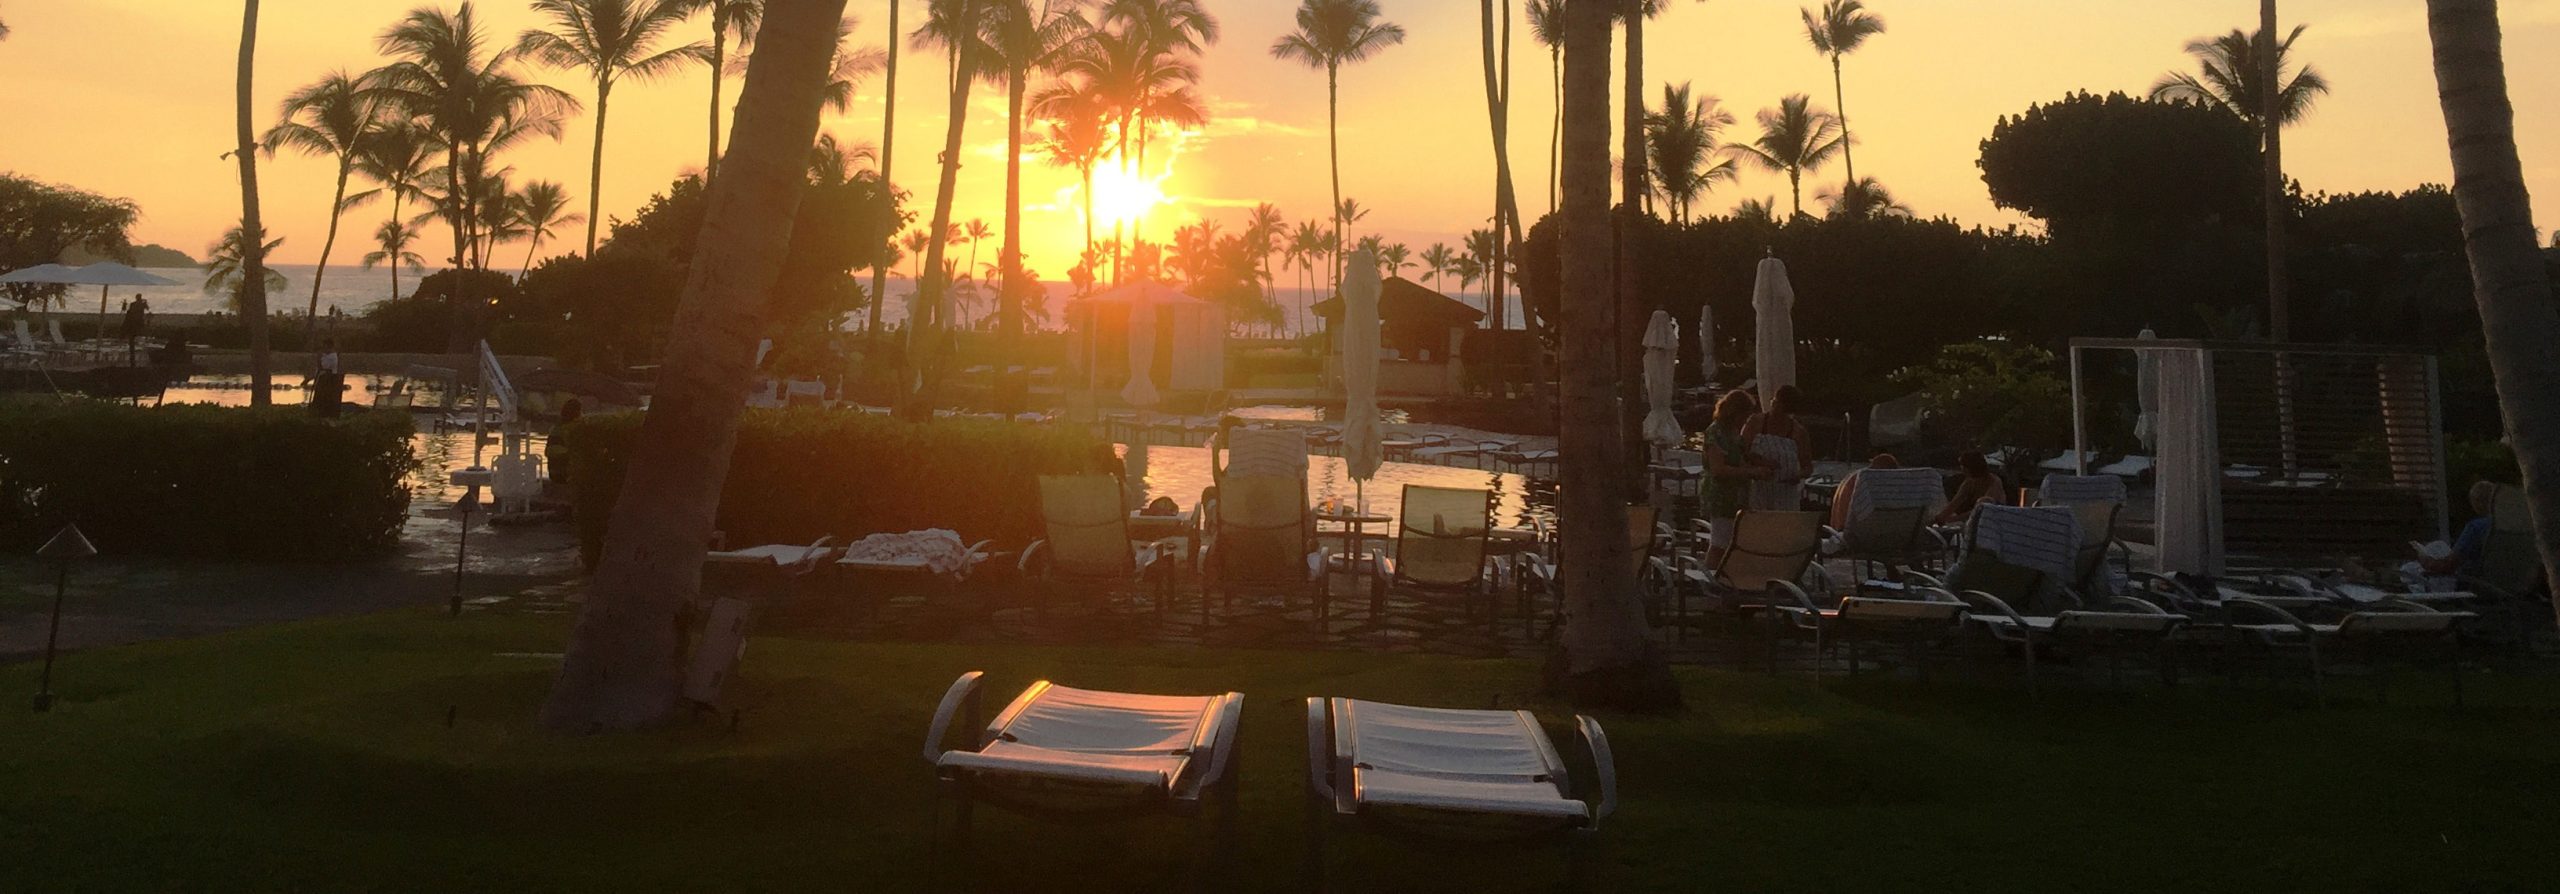 Sunset view by the pool with palm trees and sun loungers